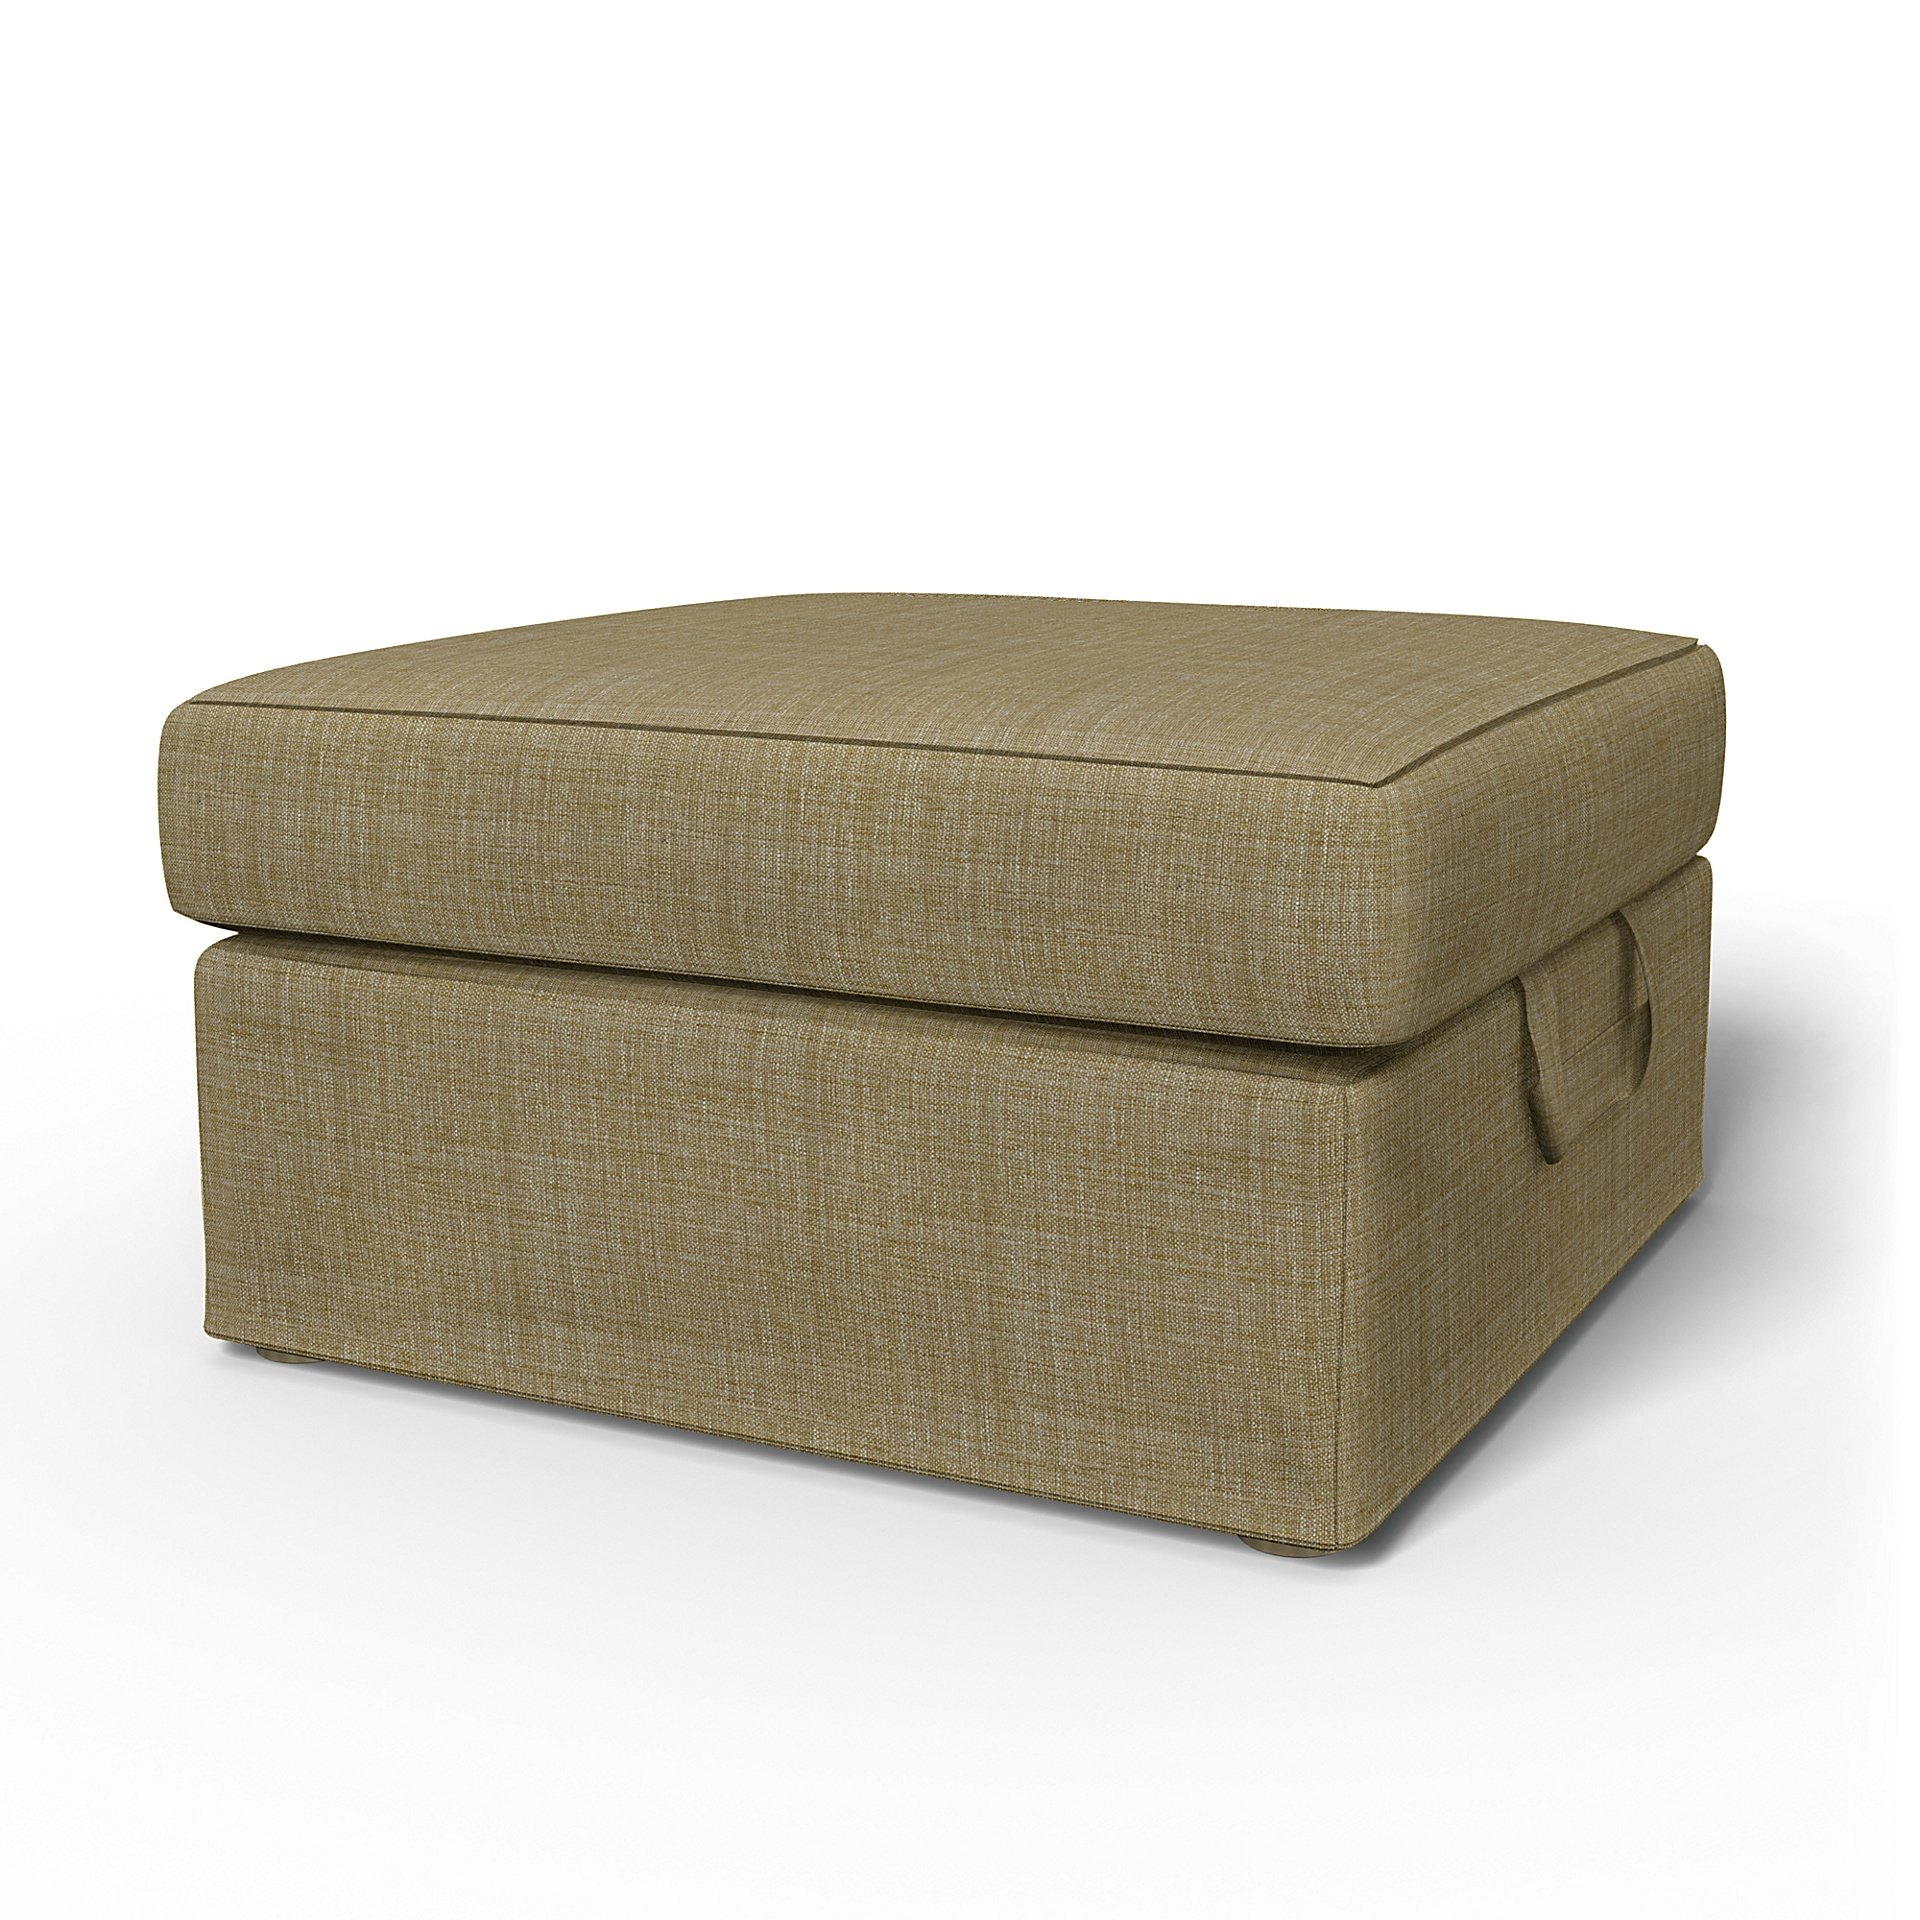 IKEA - Tomelilla Foto Footstool Cover, Dusty Yellow, Boucle & Texture - Bemz